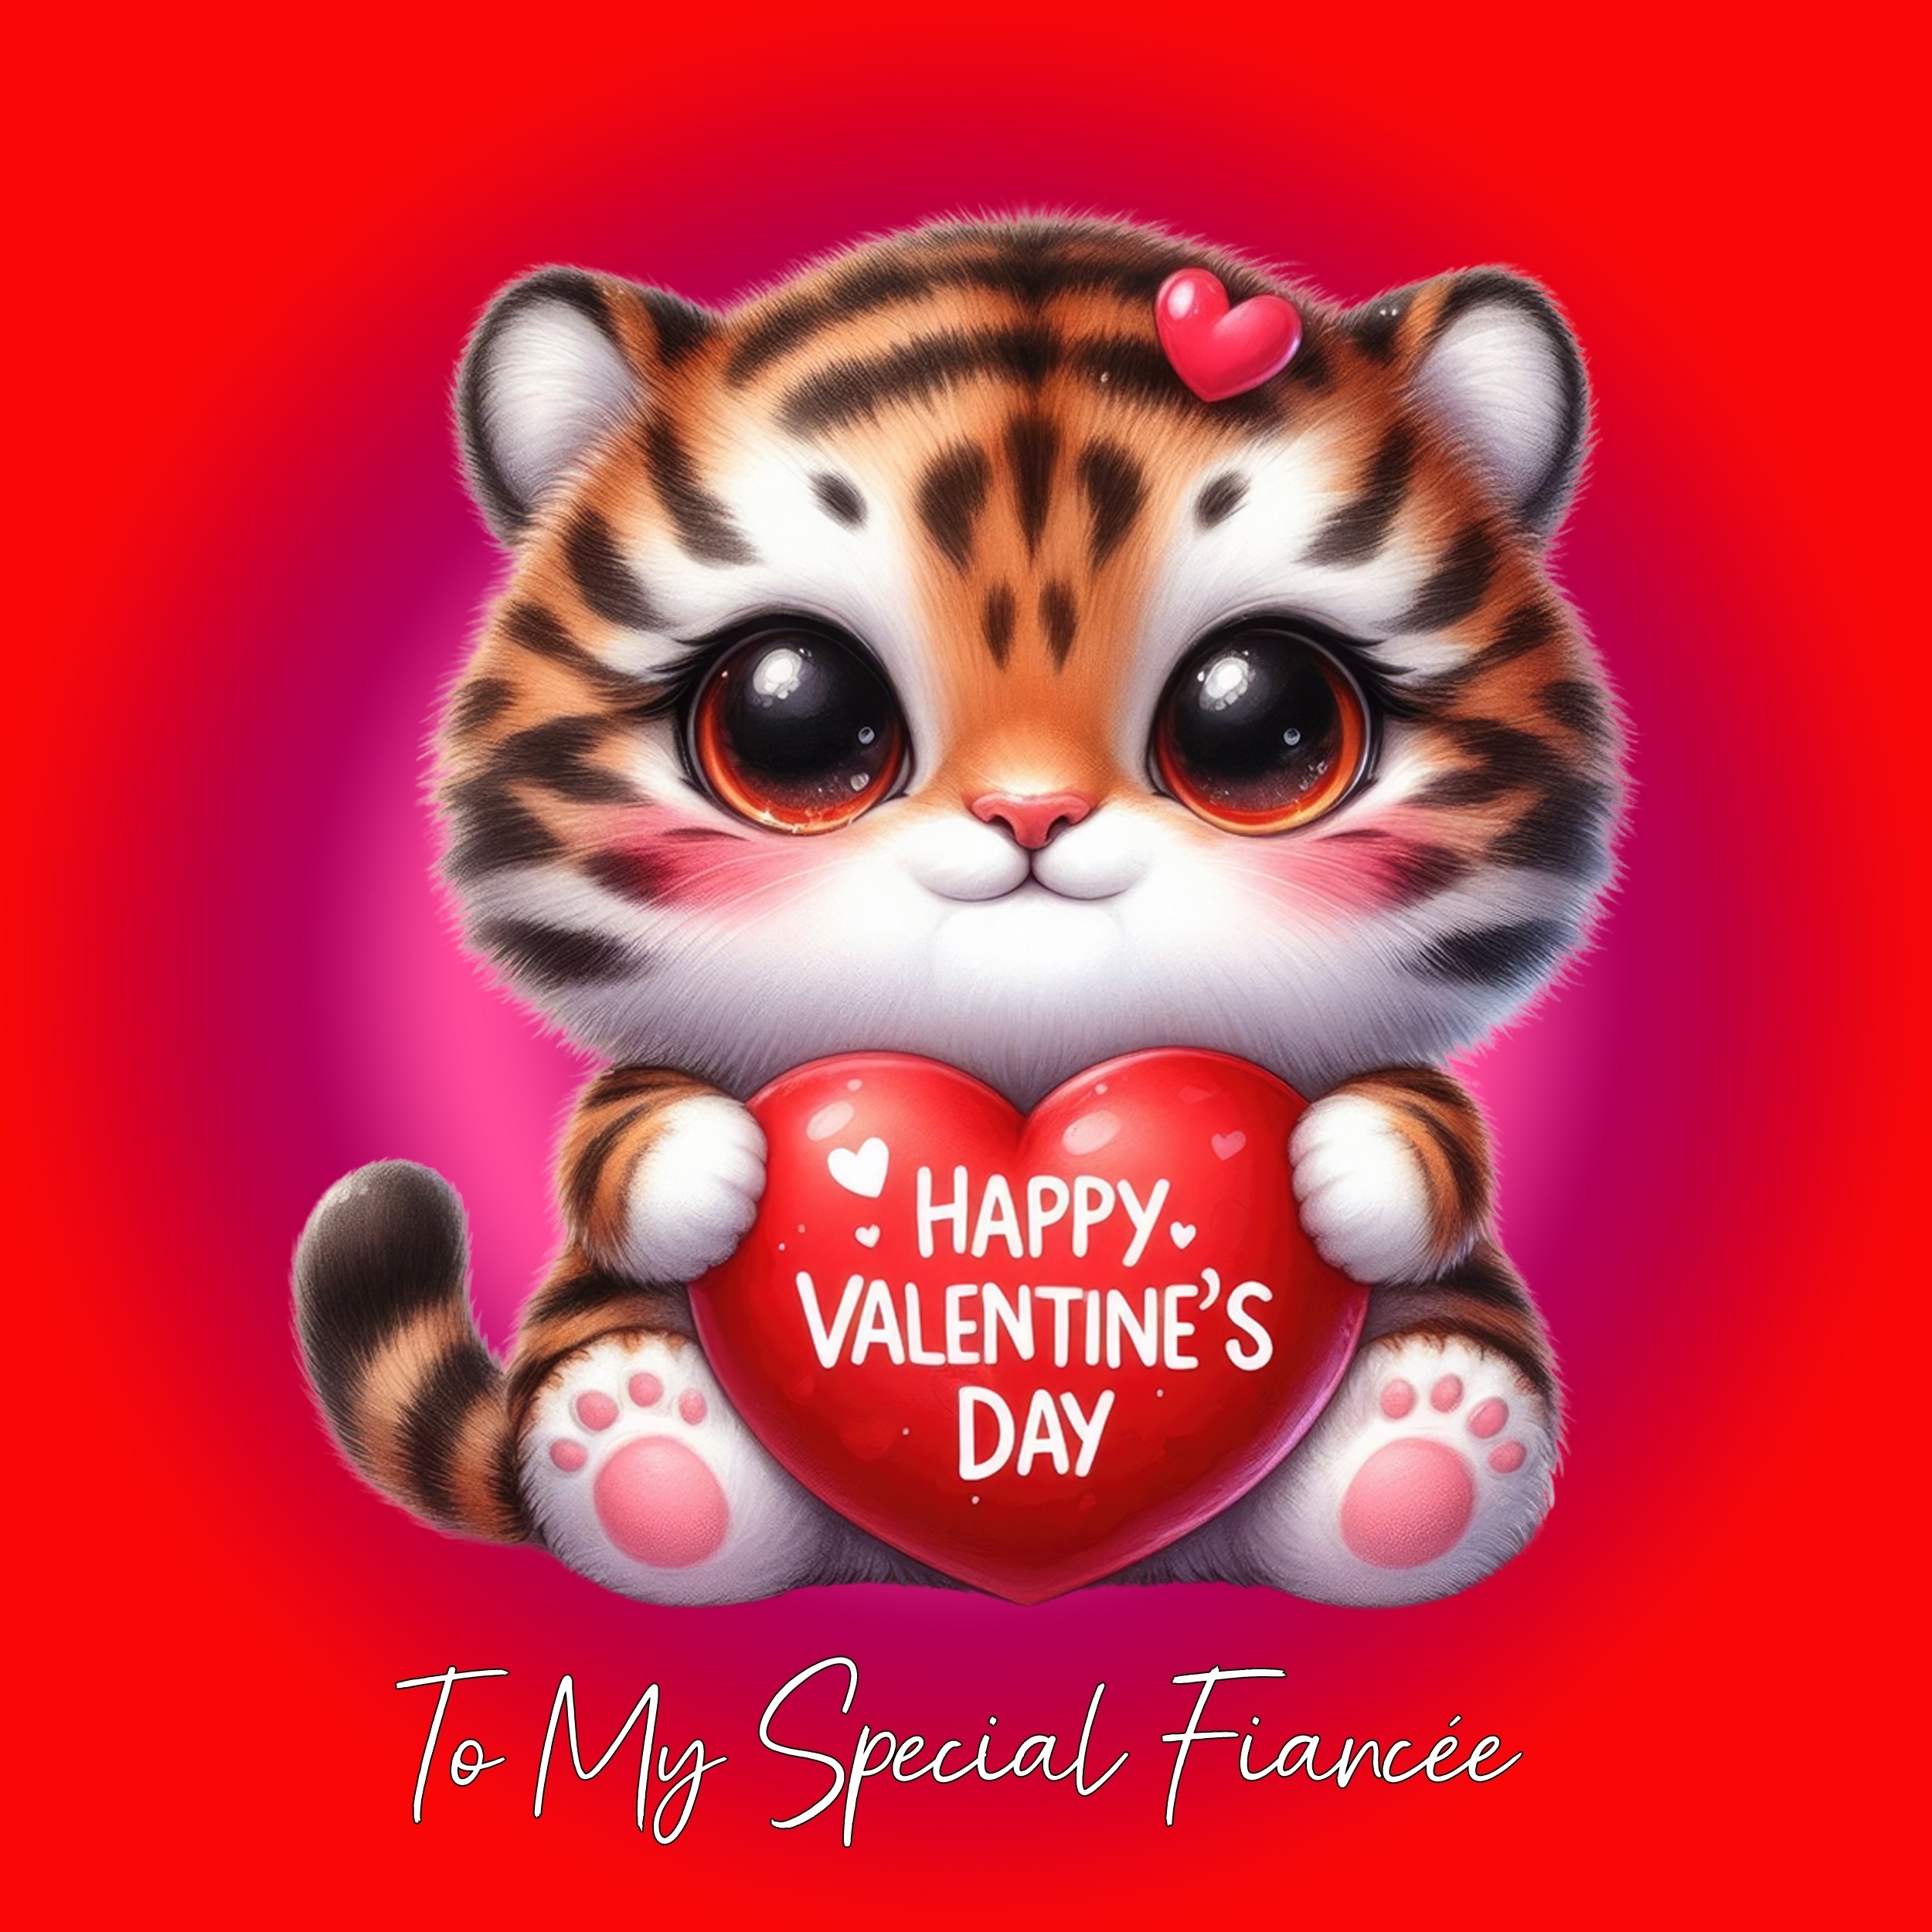 Valentines Day Square Card for Fiancee (Tiger)